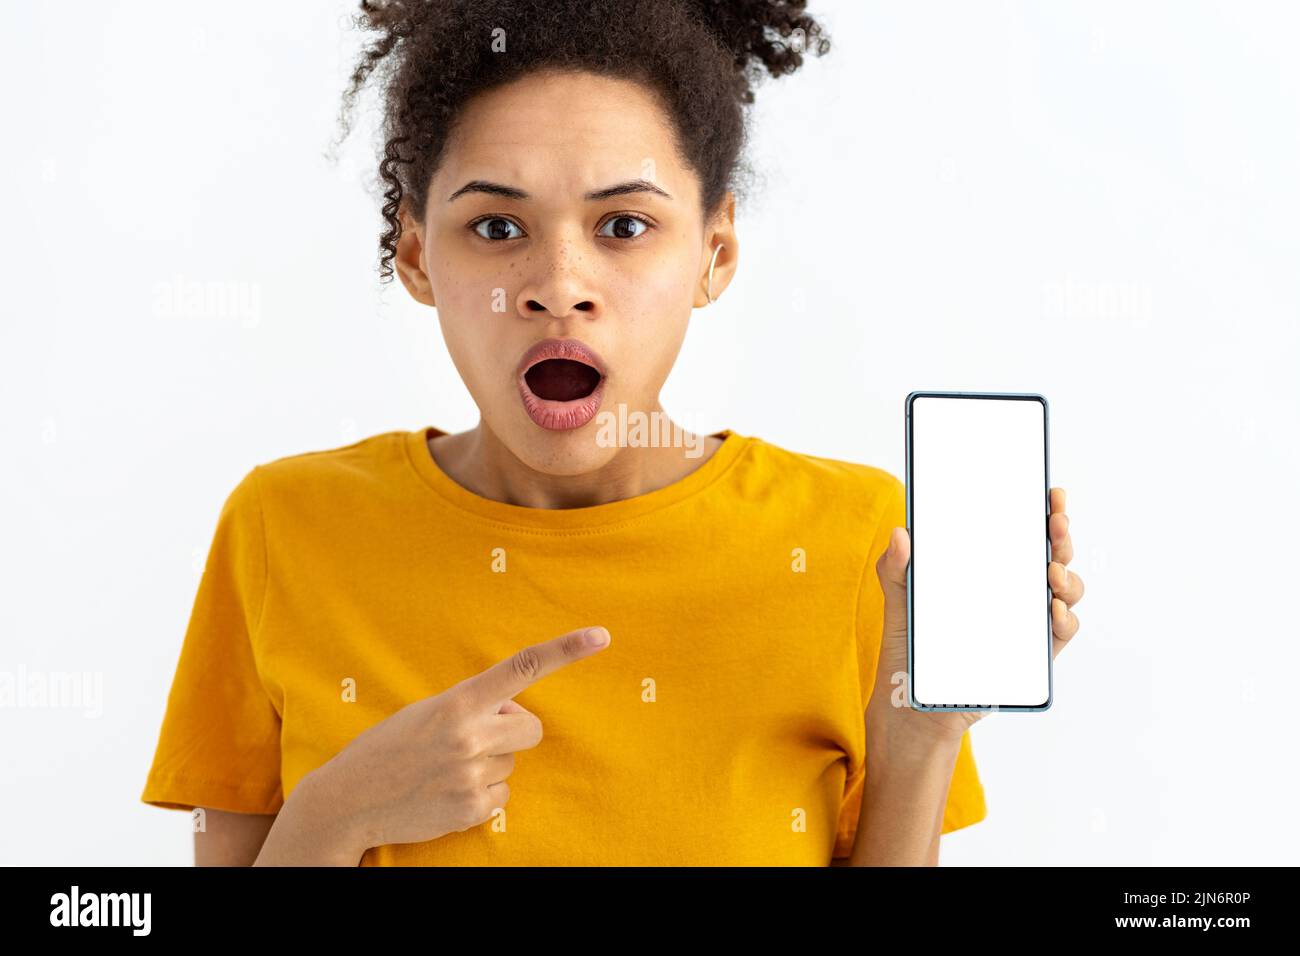 young surprised woman with mobile phone on white background looking at the camera Stock Photo